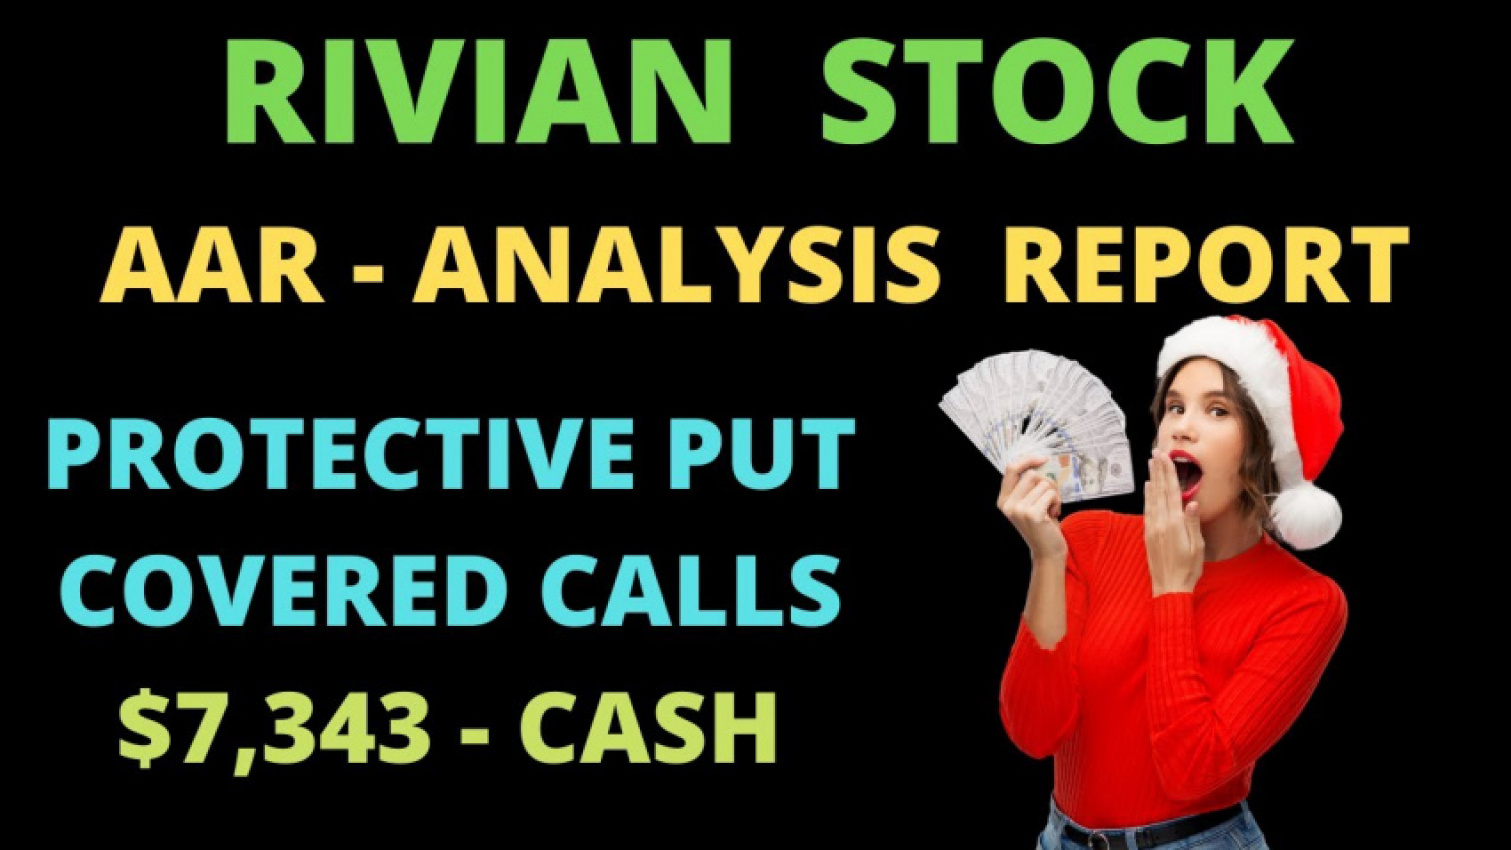 auto, autos, cars, rivian, call options, call options explained, call options trading, covered call options, is rivian stock a buy, premiums, put option and call option, put option trading, put options, put options explained, put options strategy, rivian news, rivian review, rivian stock, rivian stock analysis, rivian stock news, rivian stock news today, rivian stock predictions, rivian stock price, rivian stock price prediction, rivian stock review, rivian stock today, rivian stocks, rivn, rivn stock, rivn stock: rivian stock news today – analysis, cash received by using put and covered call options?